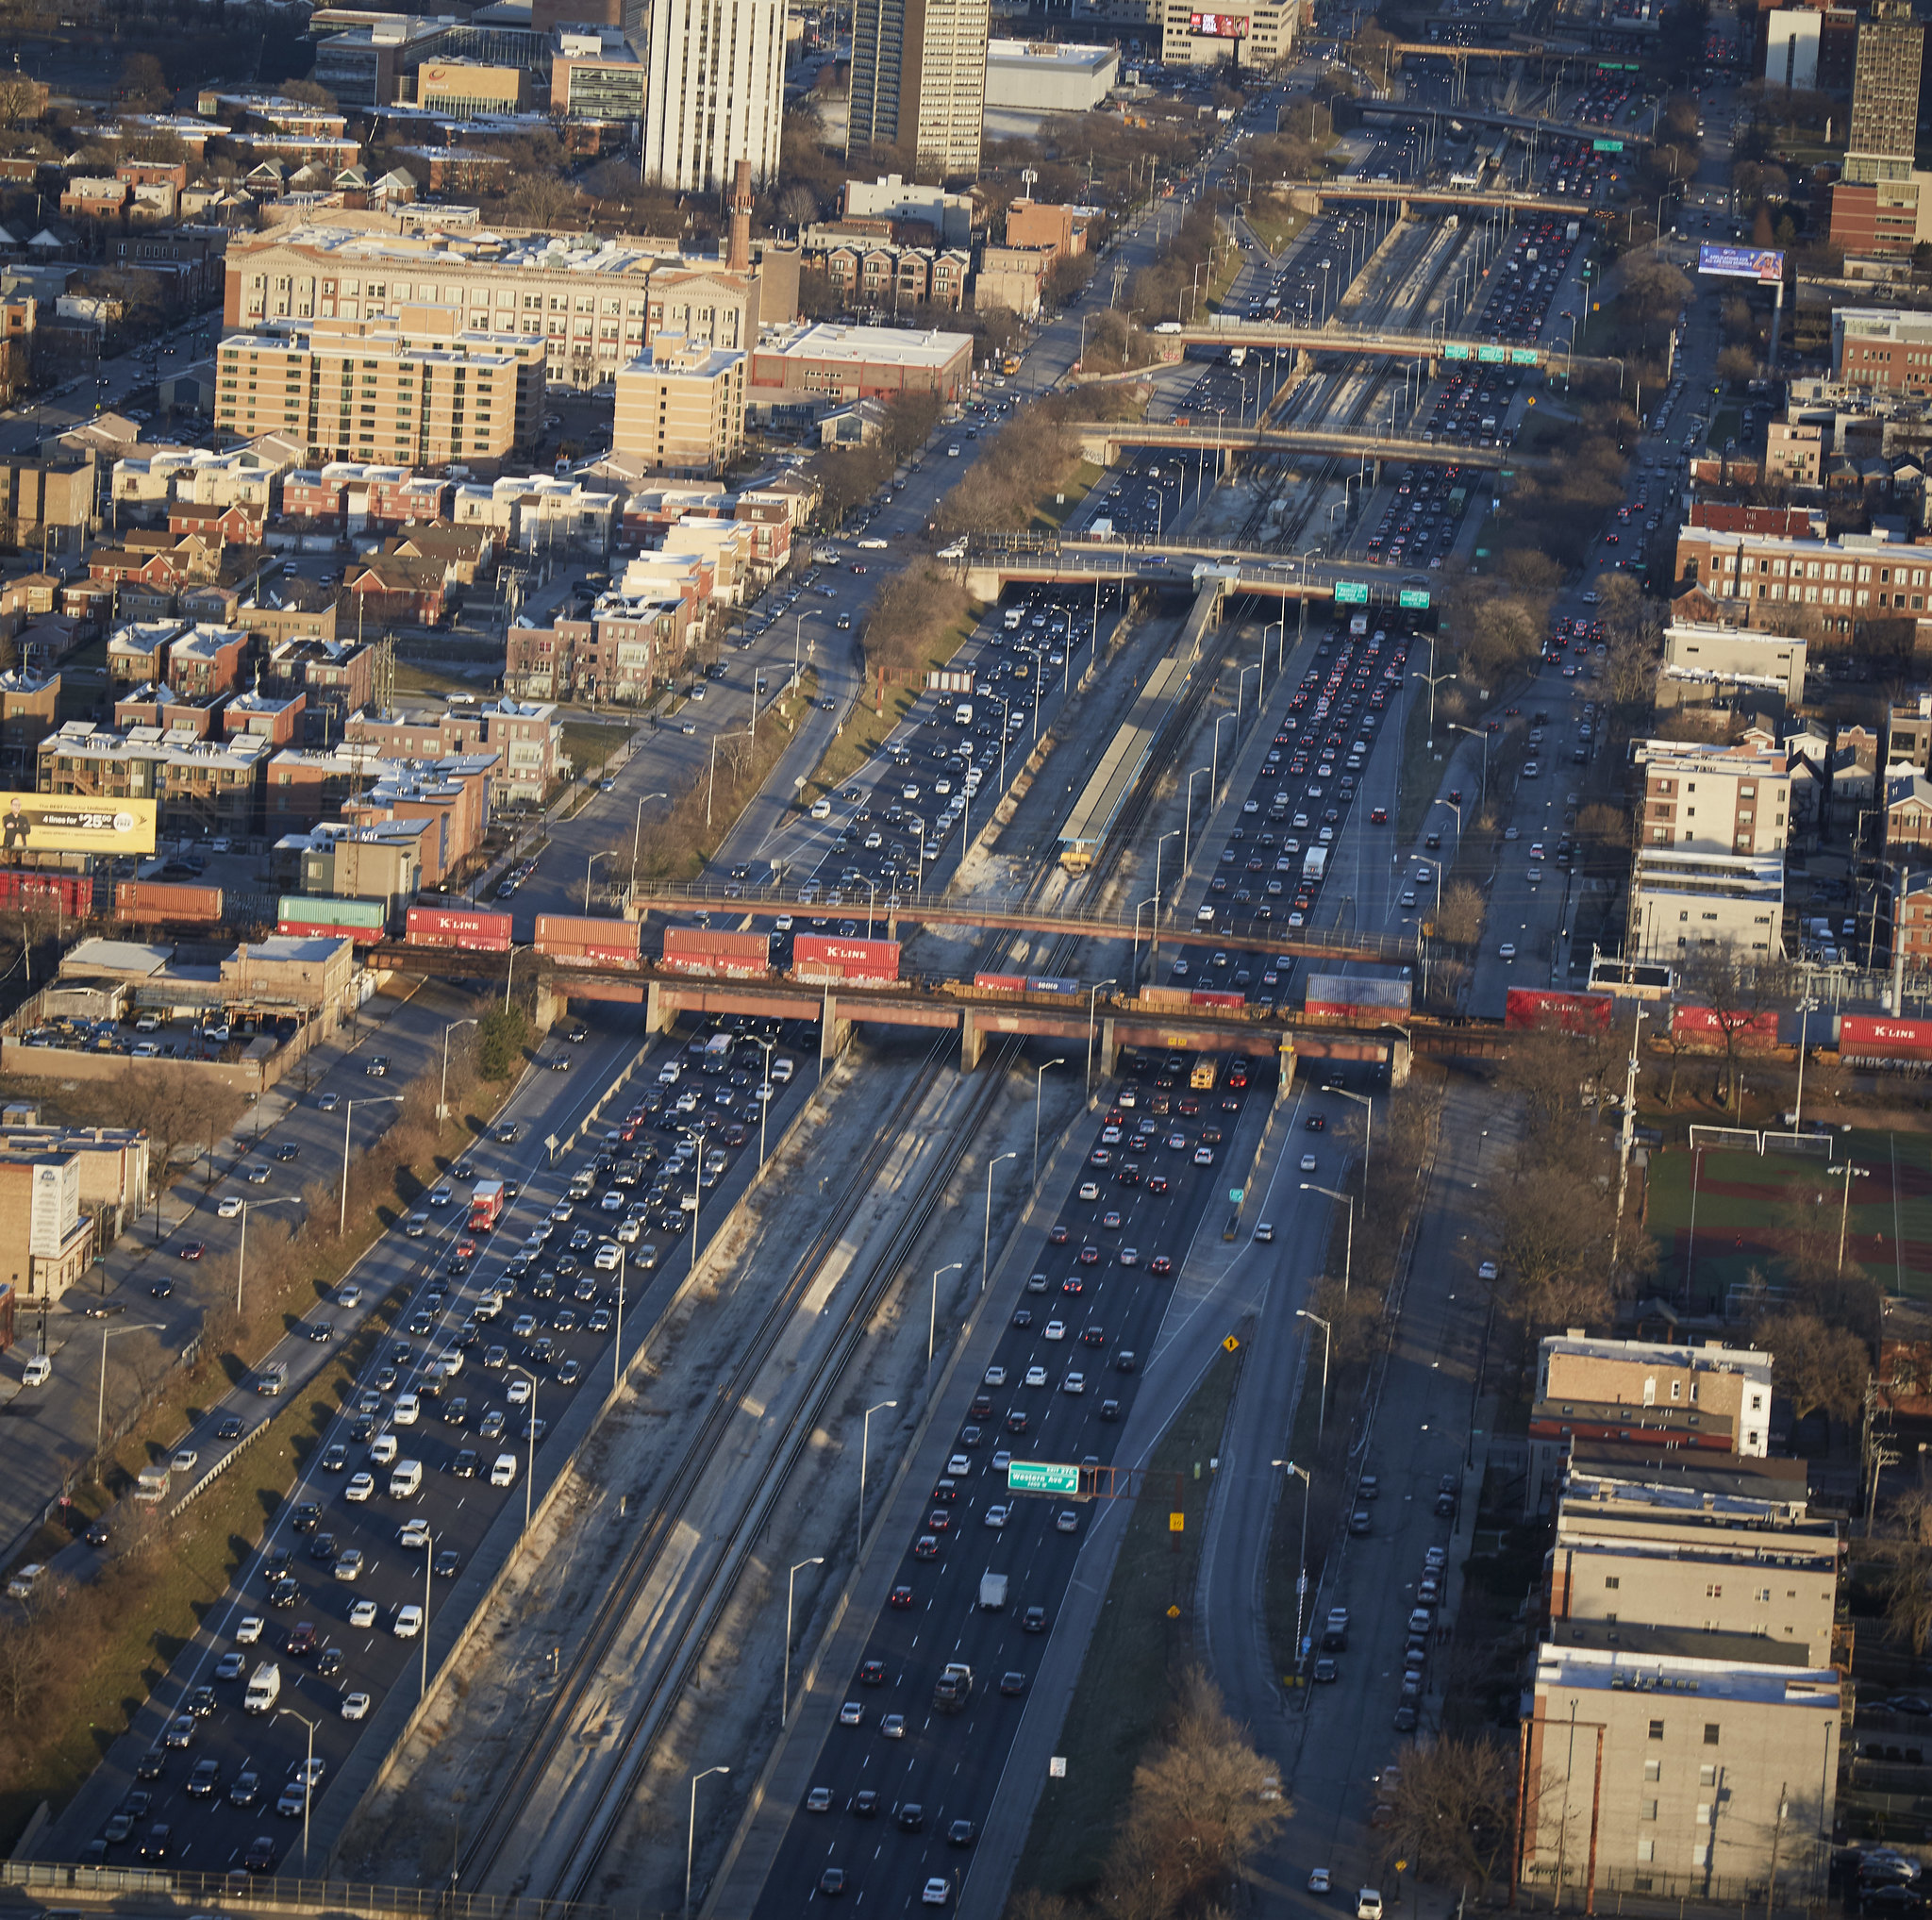 Train crosses on bridge over expressway filled with cars